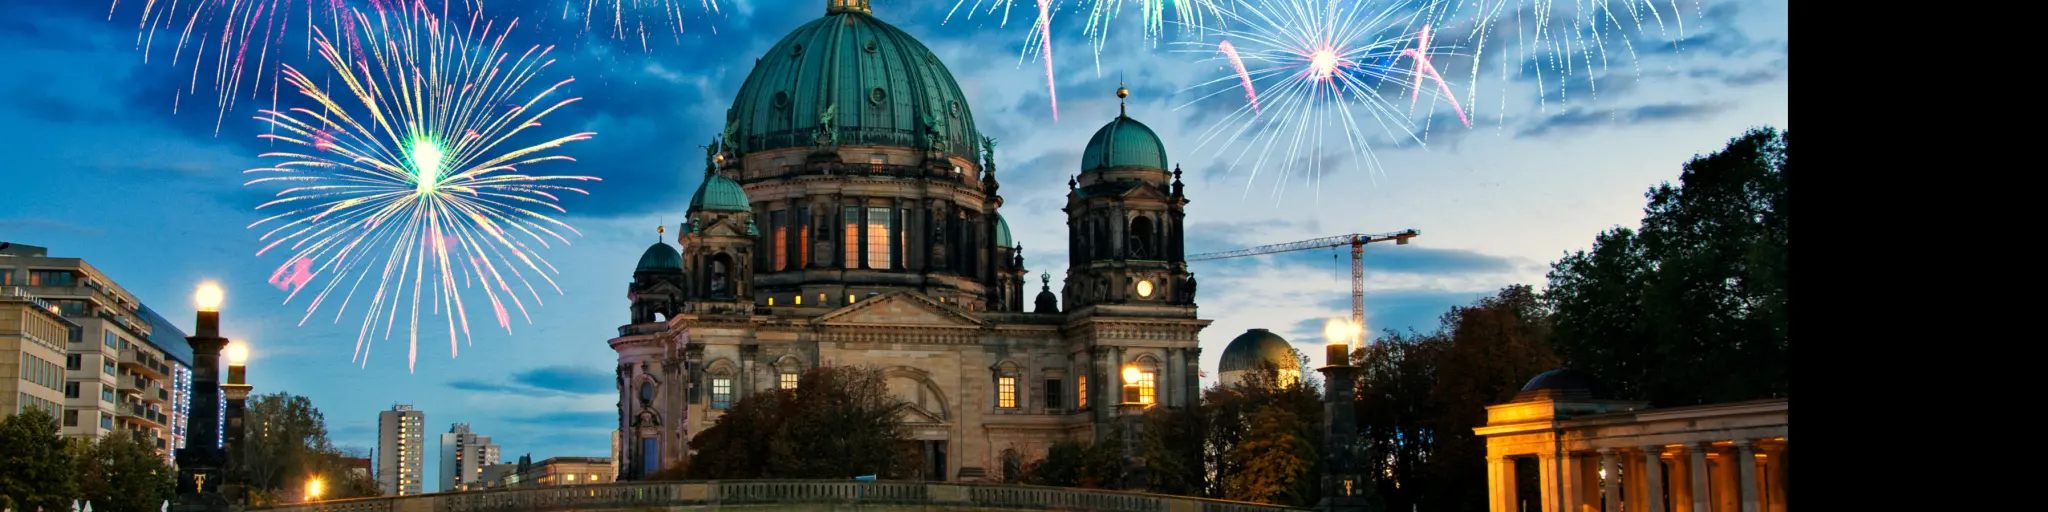 Berlin city break - a perfect evening with fireworks